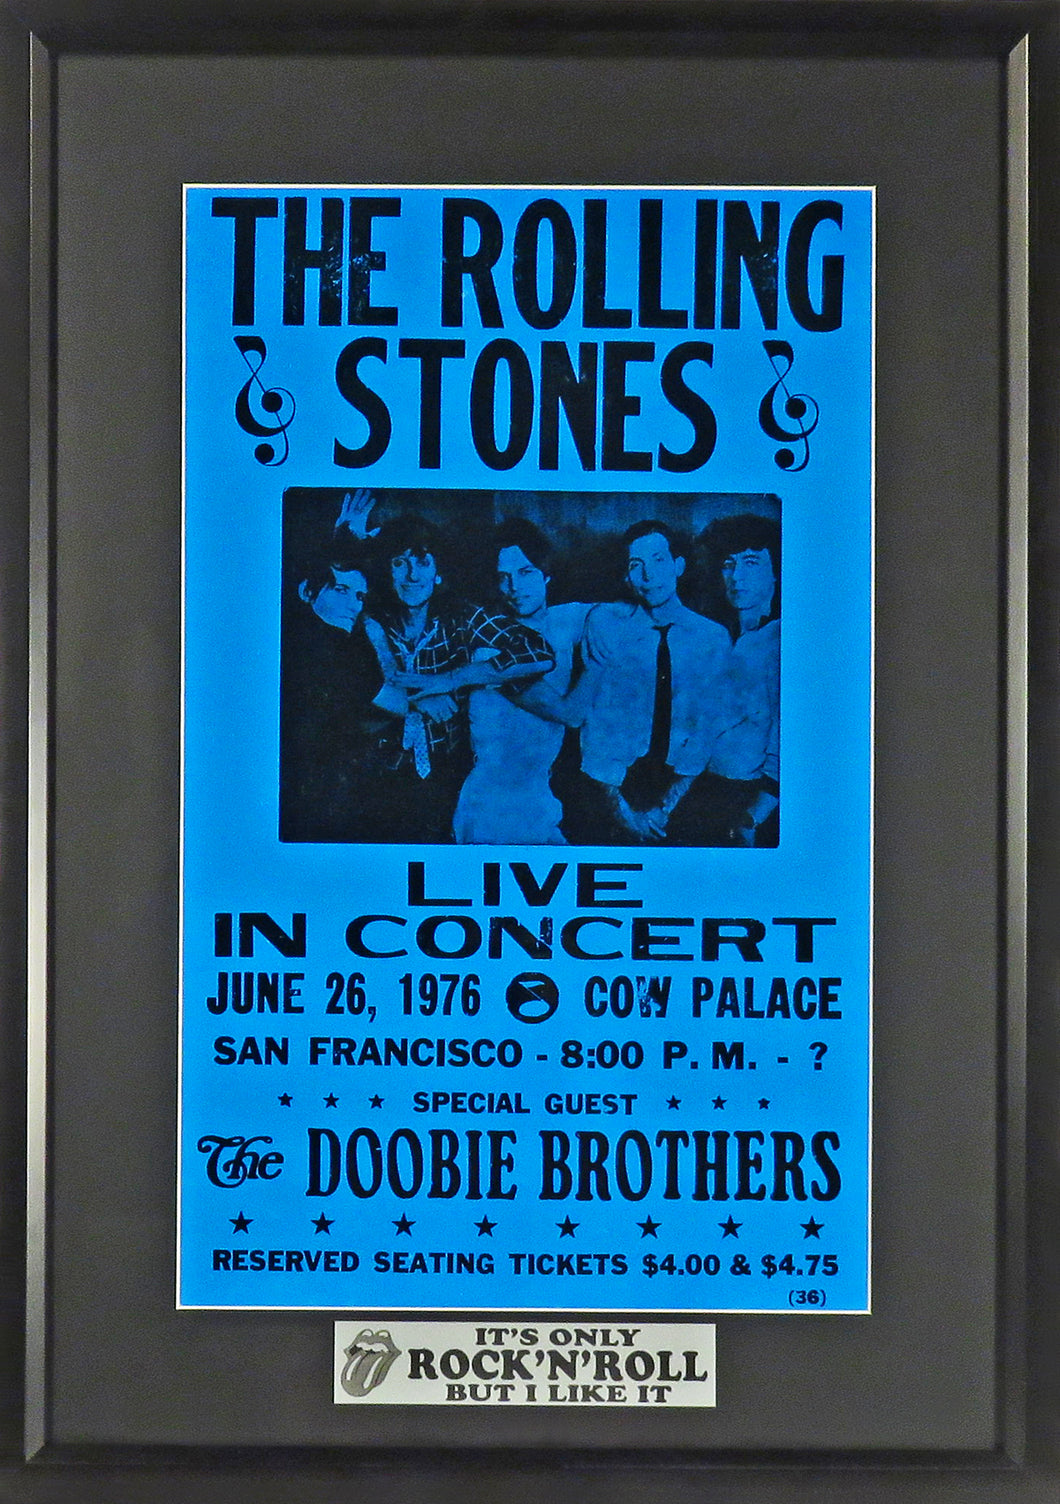 The Rolling Stones @ Cow Palace Framed Concert Poster (Engraved Series)